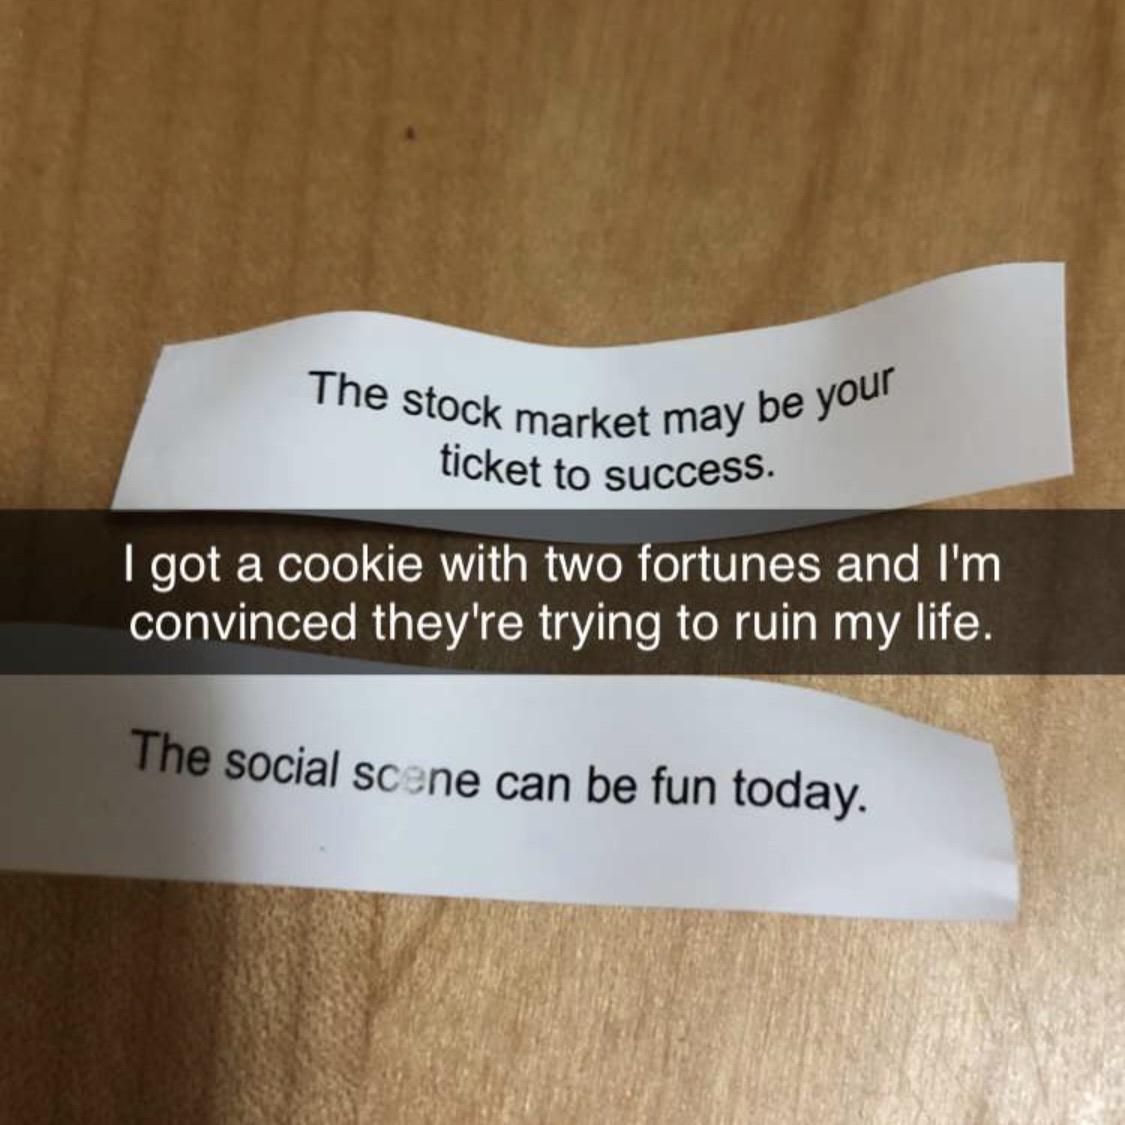 my friend got a two for one fortune in a cookie today. not looking like good advice.